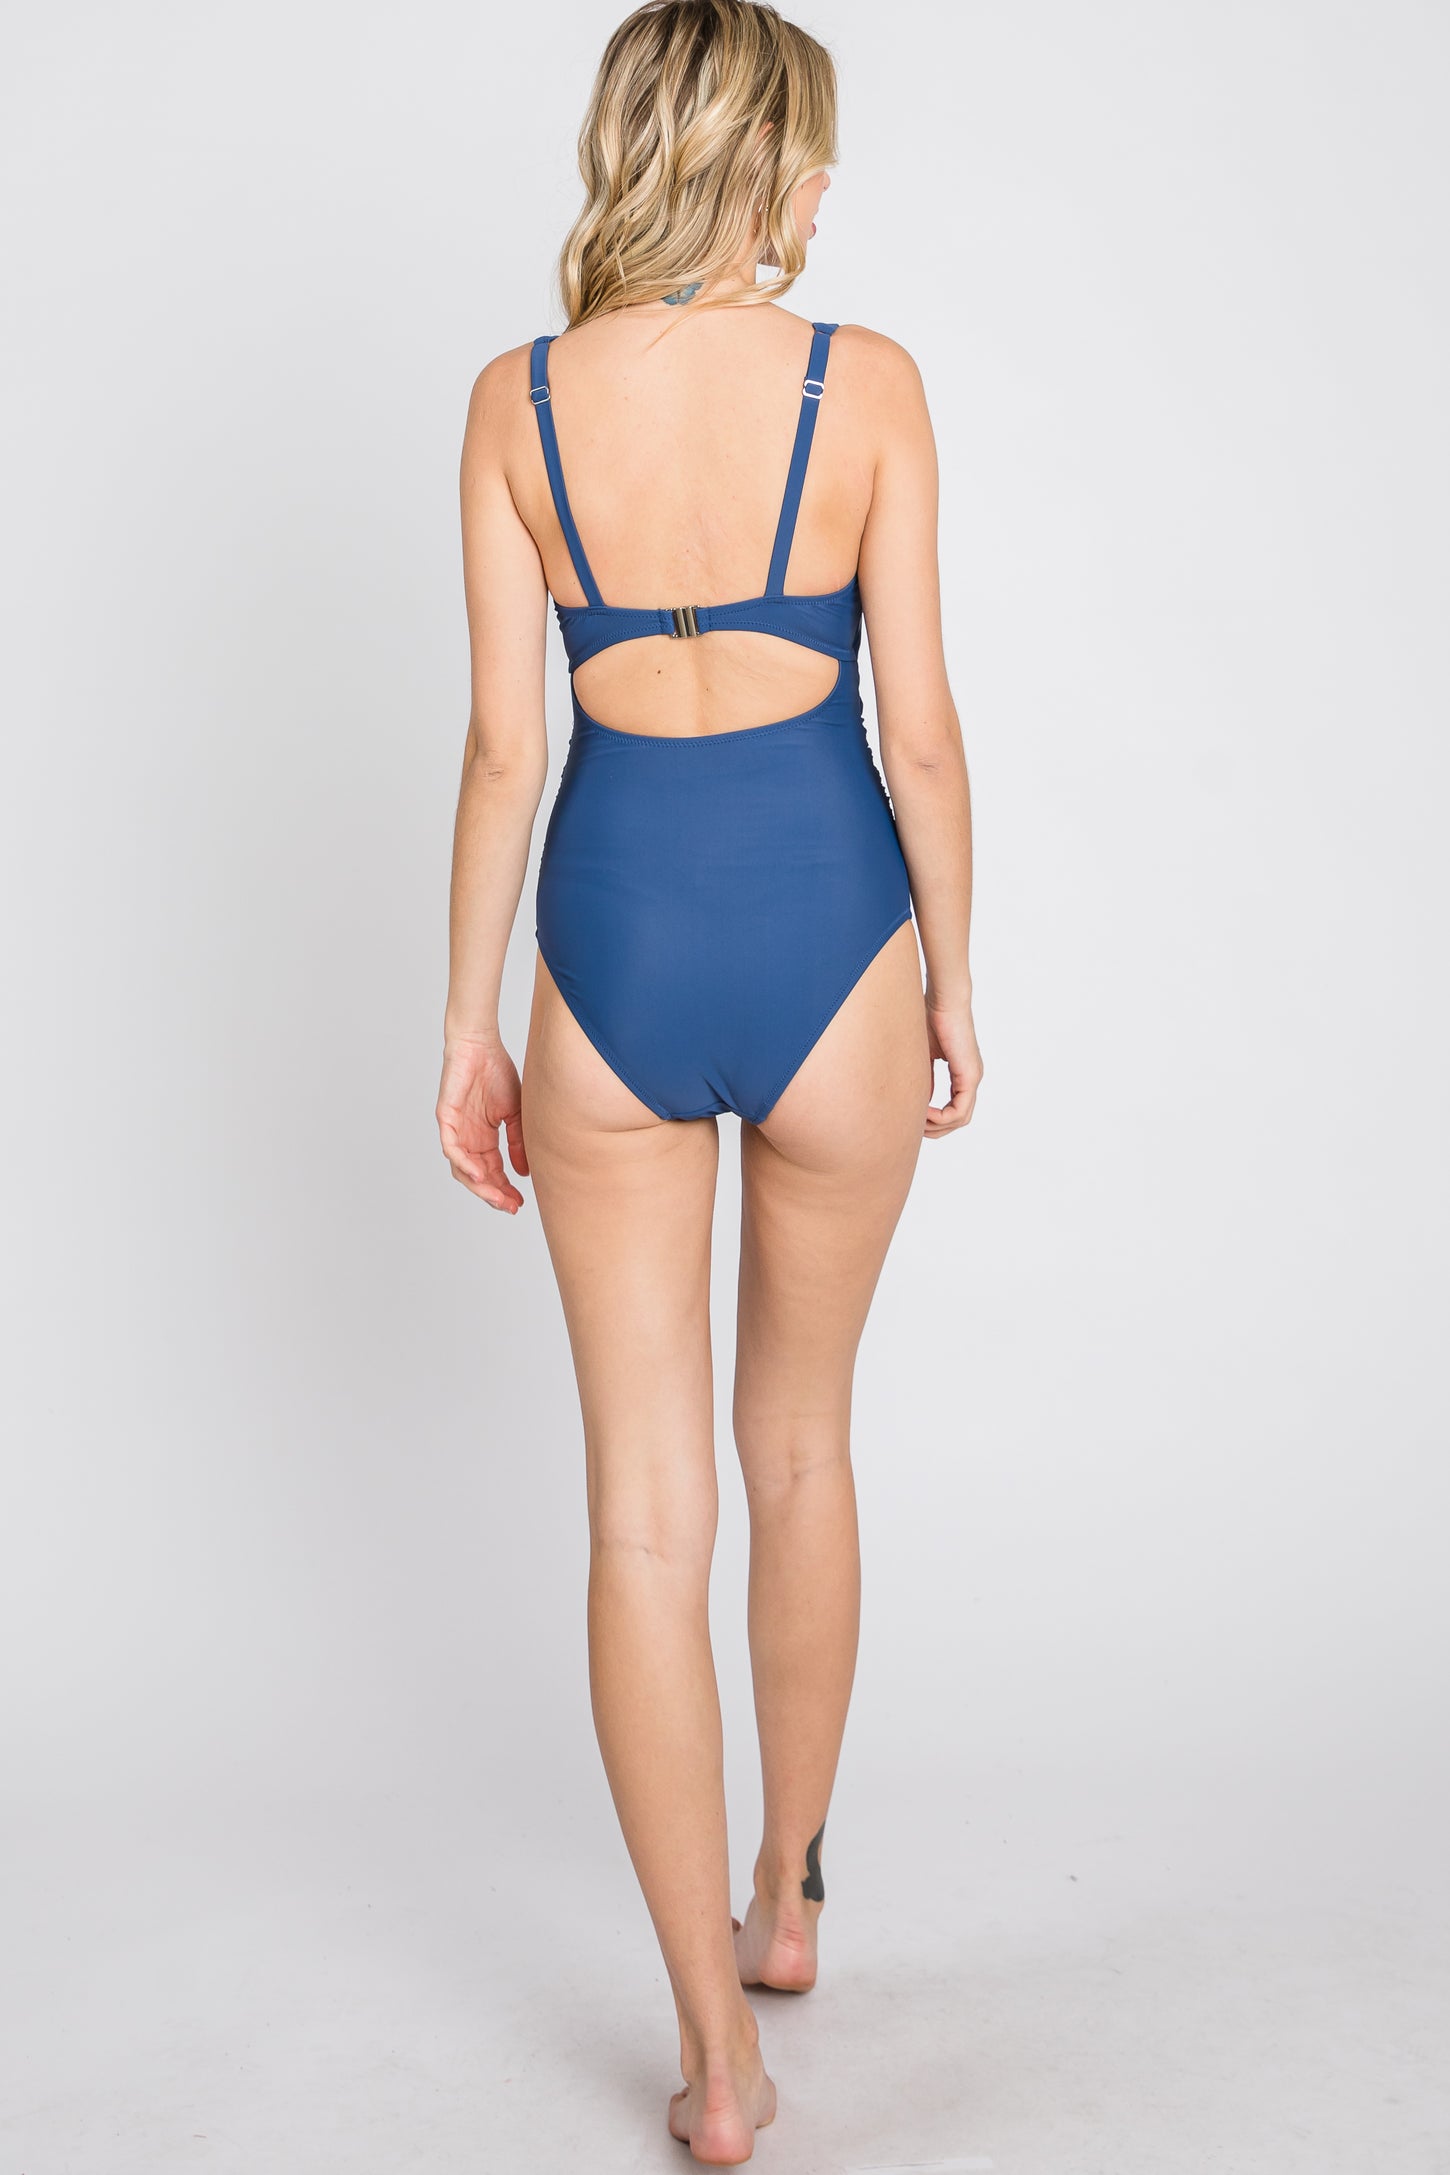 Navy Blue Ruched Sides Front Cutout Maternity One Piece Swimsuit– PinkBlush